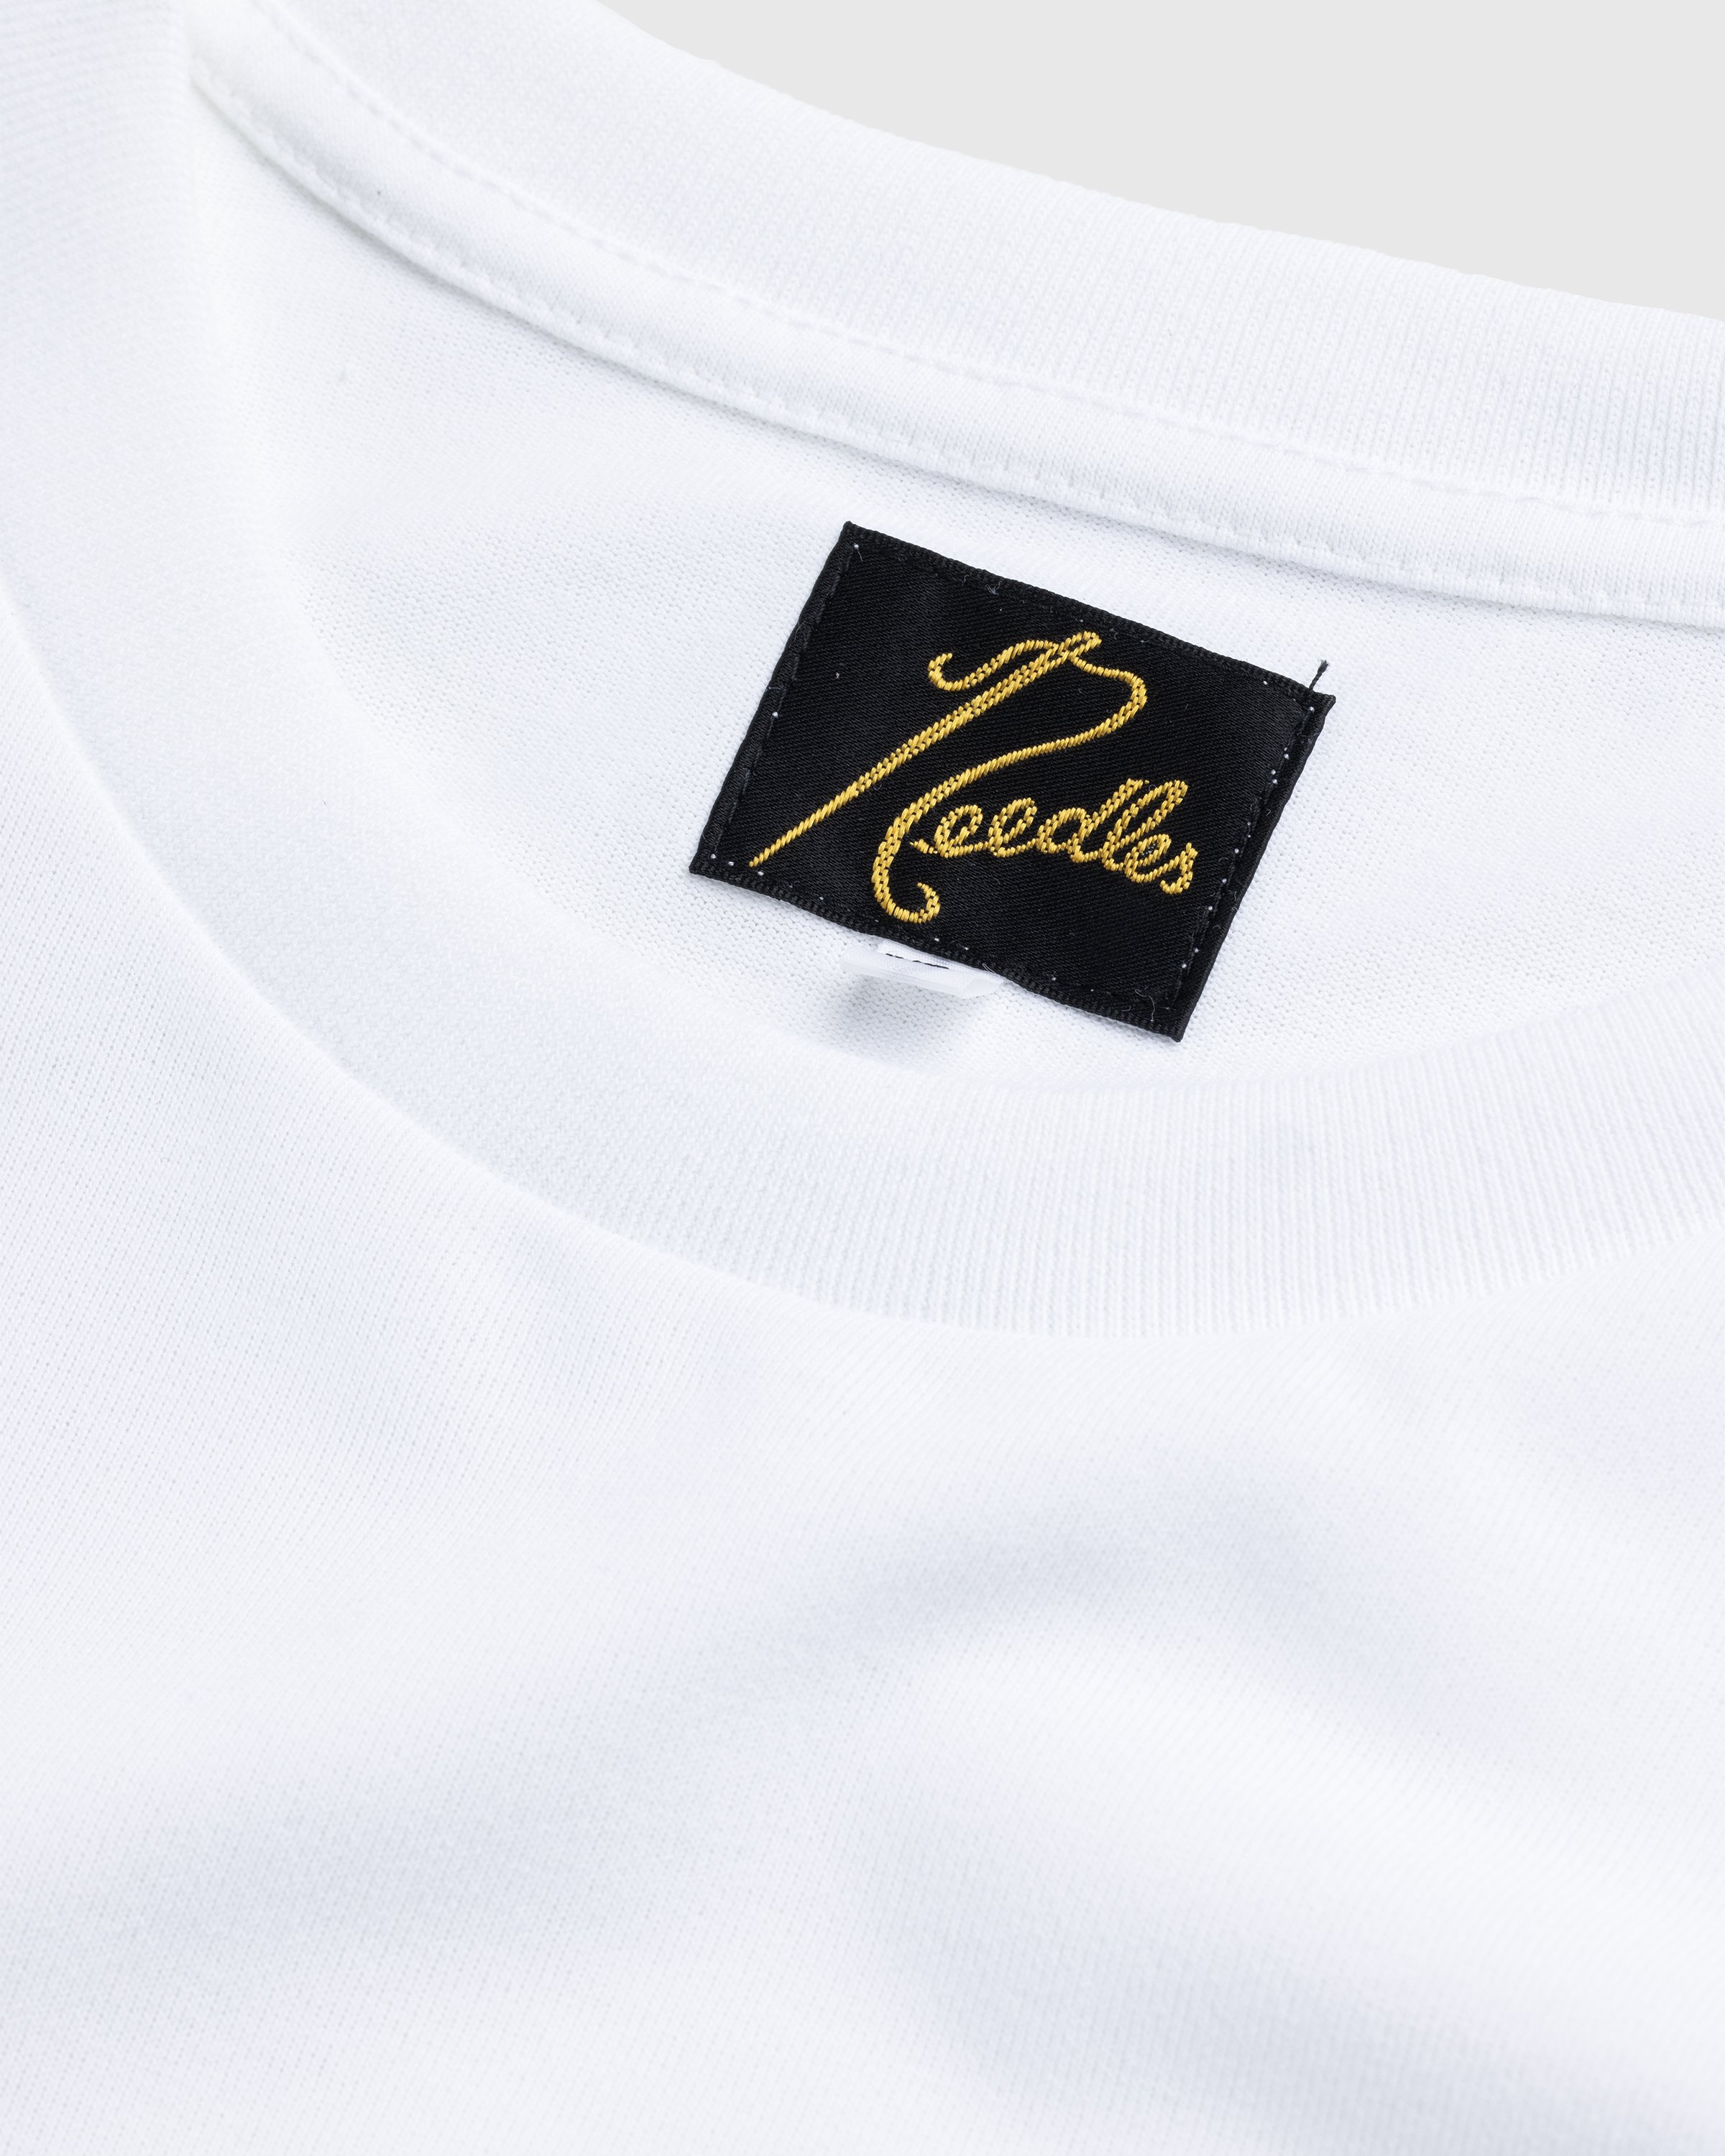 Needles - L/S Crew Neck Tee - Poly Jersey - Clothing - White - Image 7